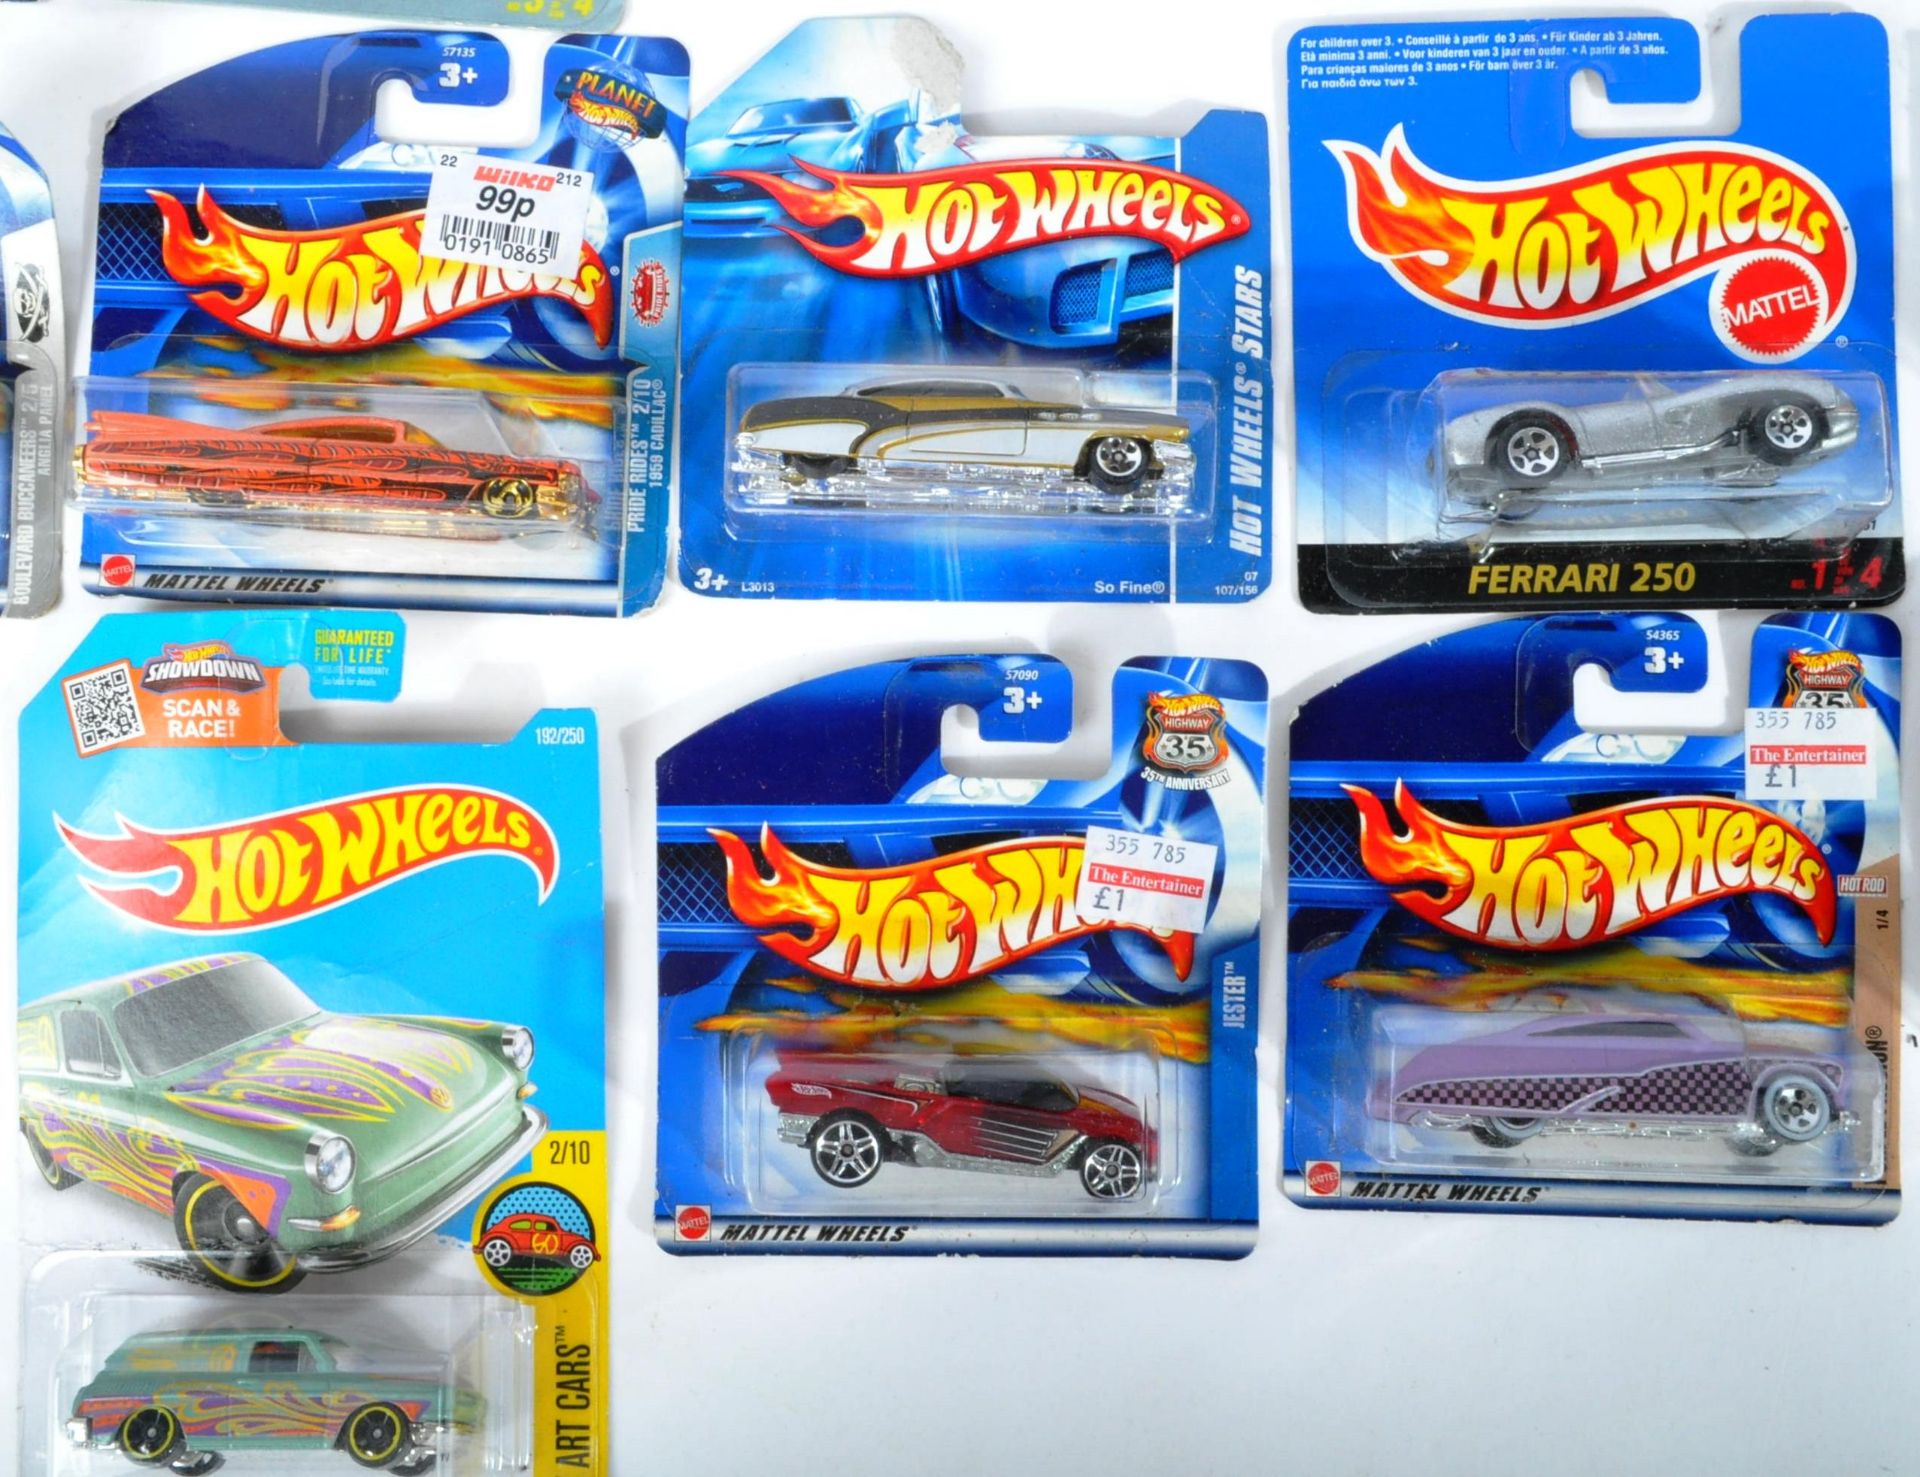 LARGE COLLECTION OF CARDED HOTWHEELS DIECAST MODEL CARS - Image 4 of 6